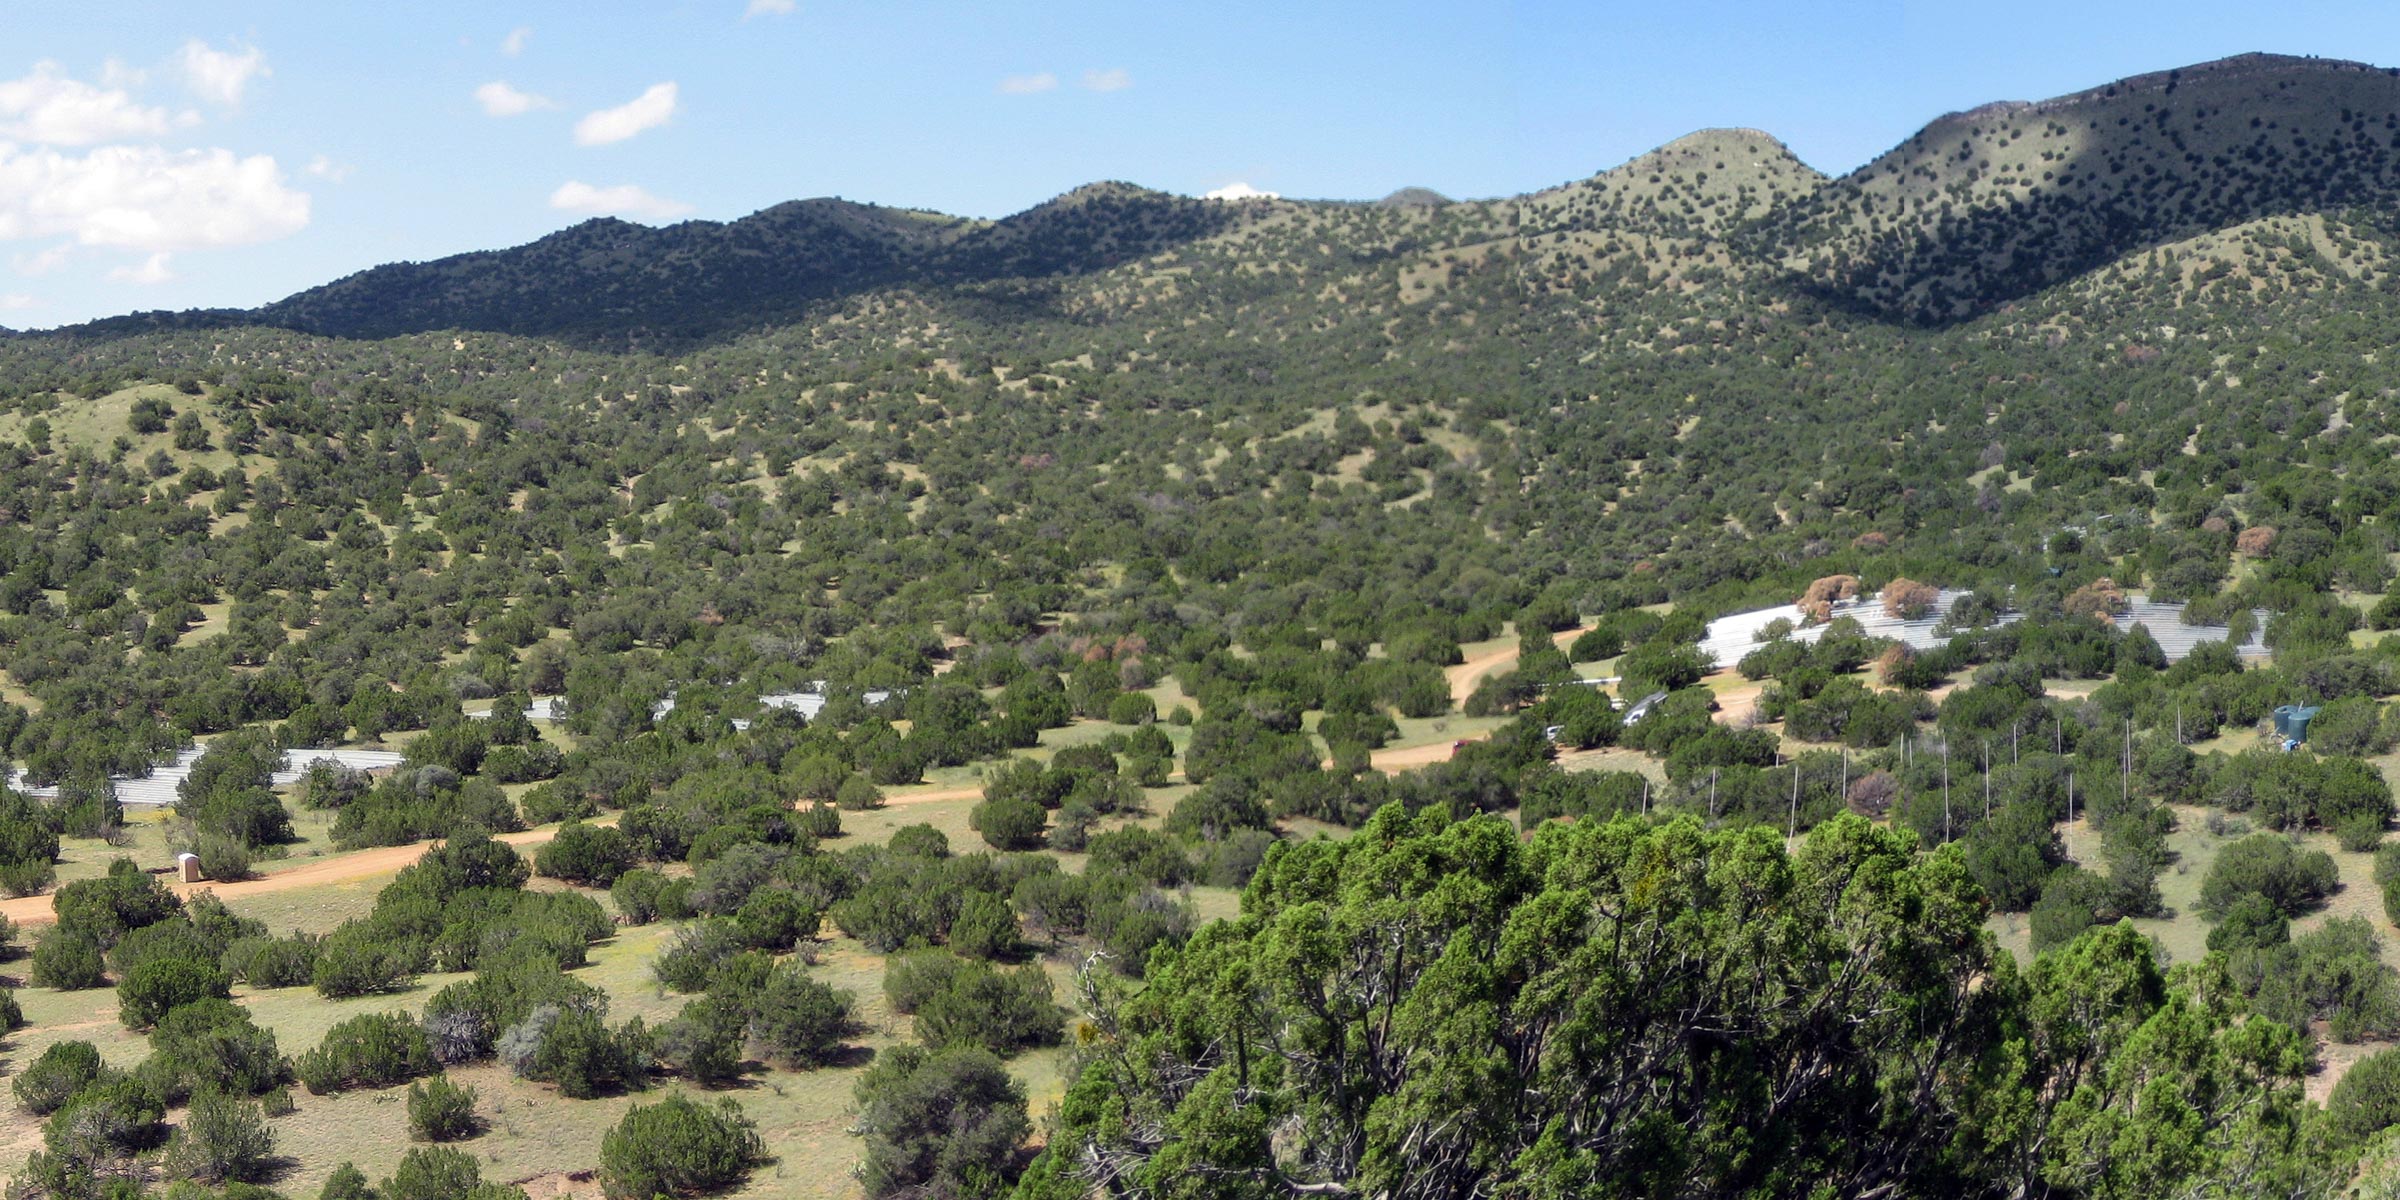 Rain-excluding plastic roofs can be seen through the canopy of a pinon-juniper woodland. The trees in one area with plastic are noticeably brown.